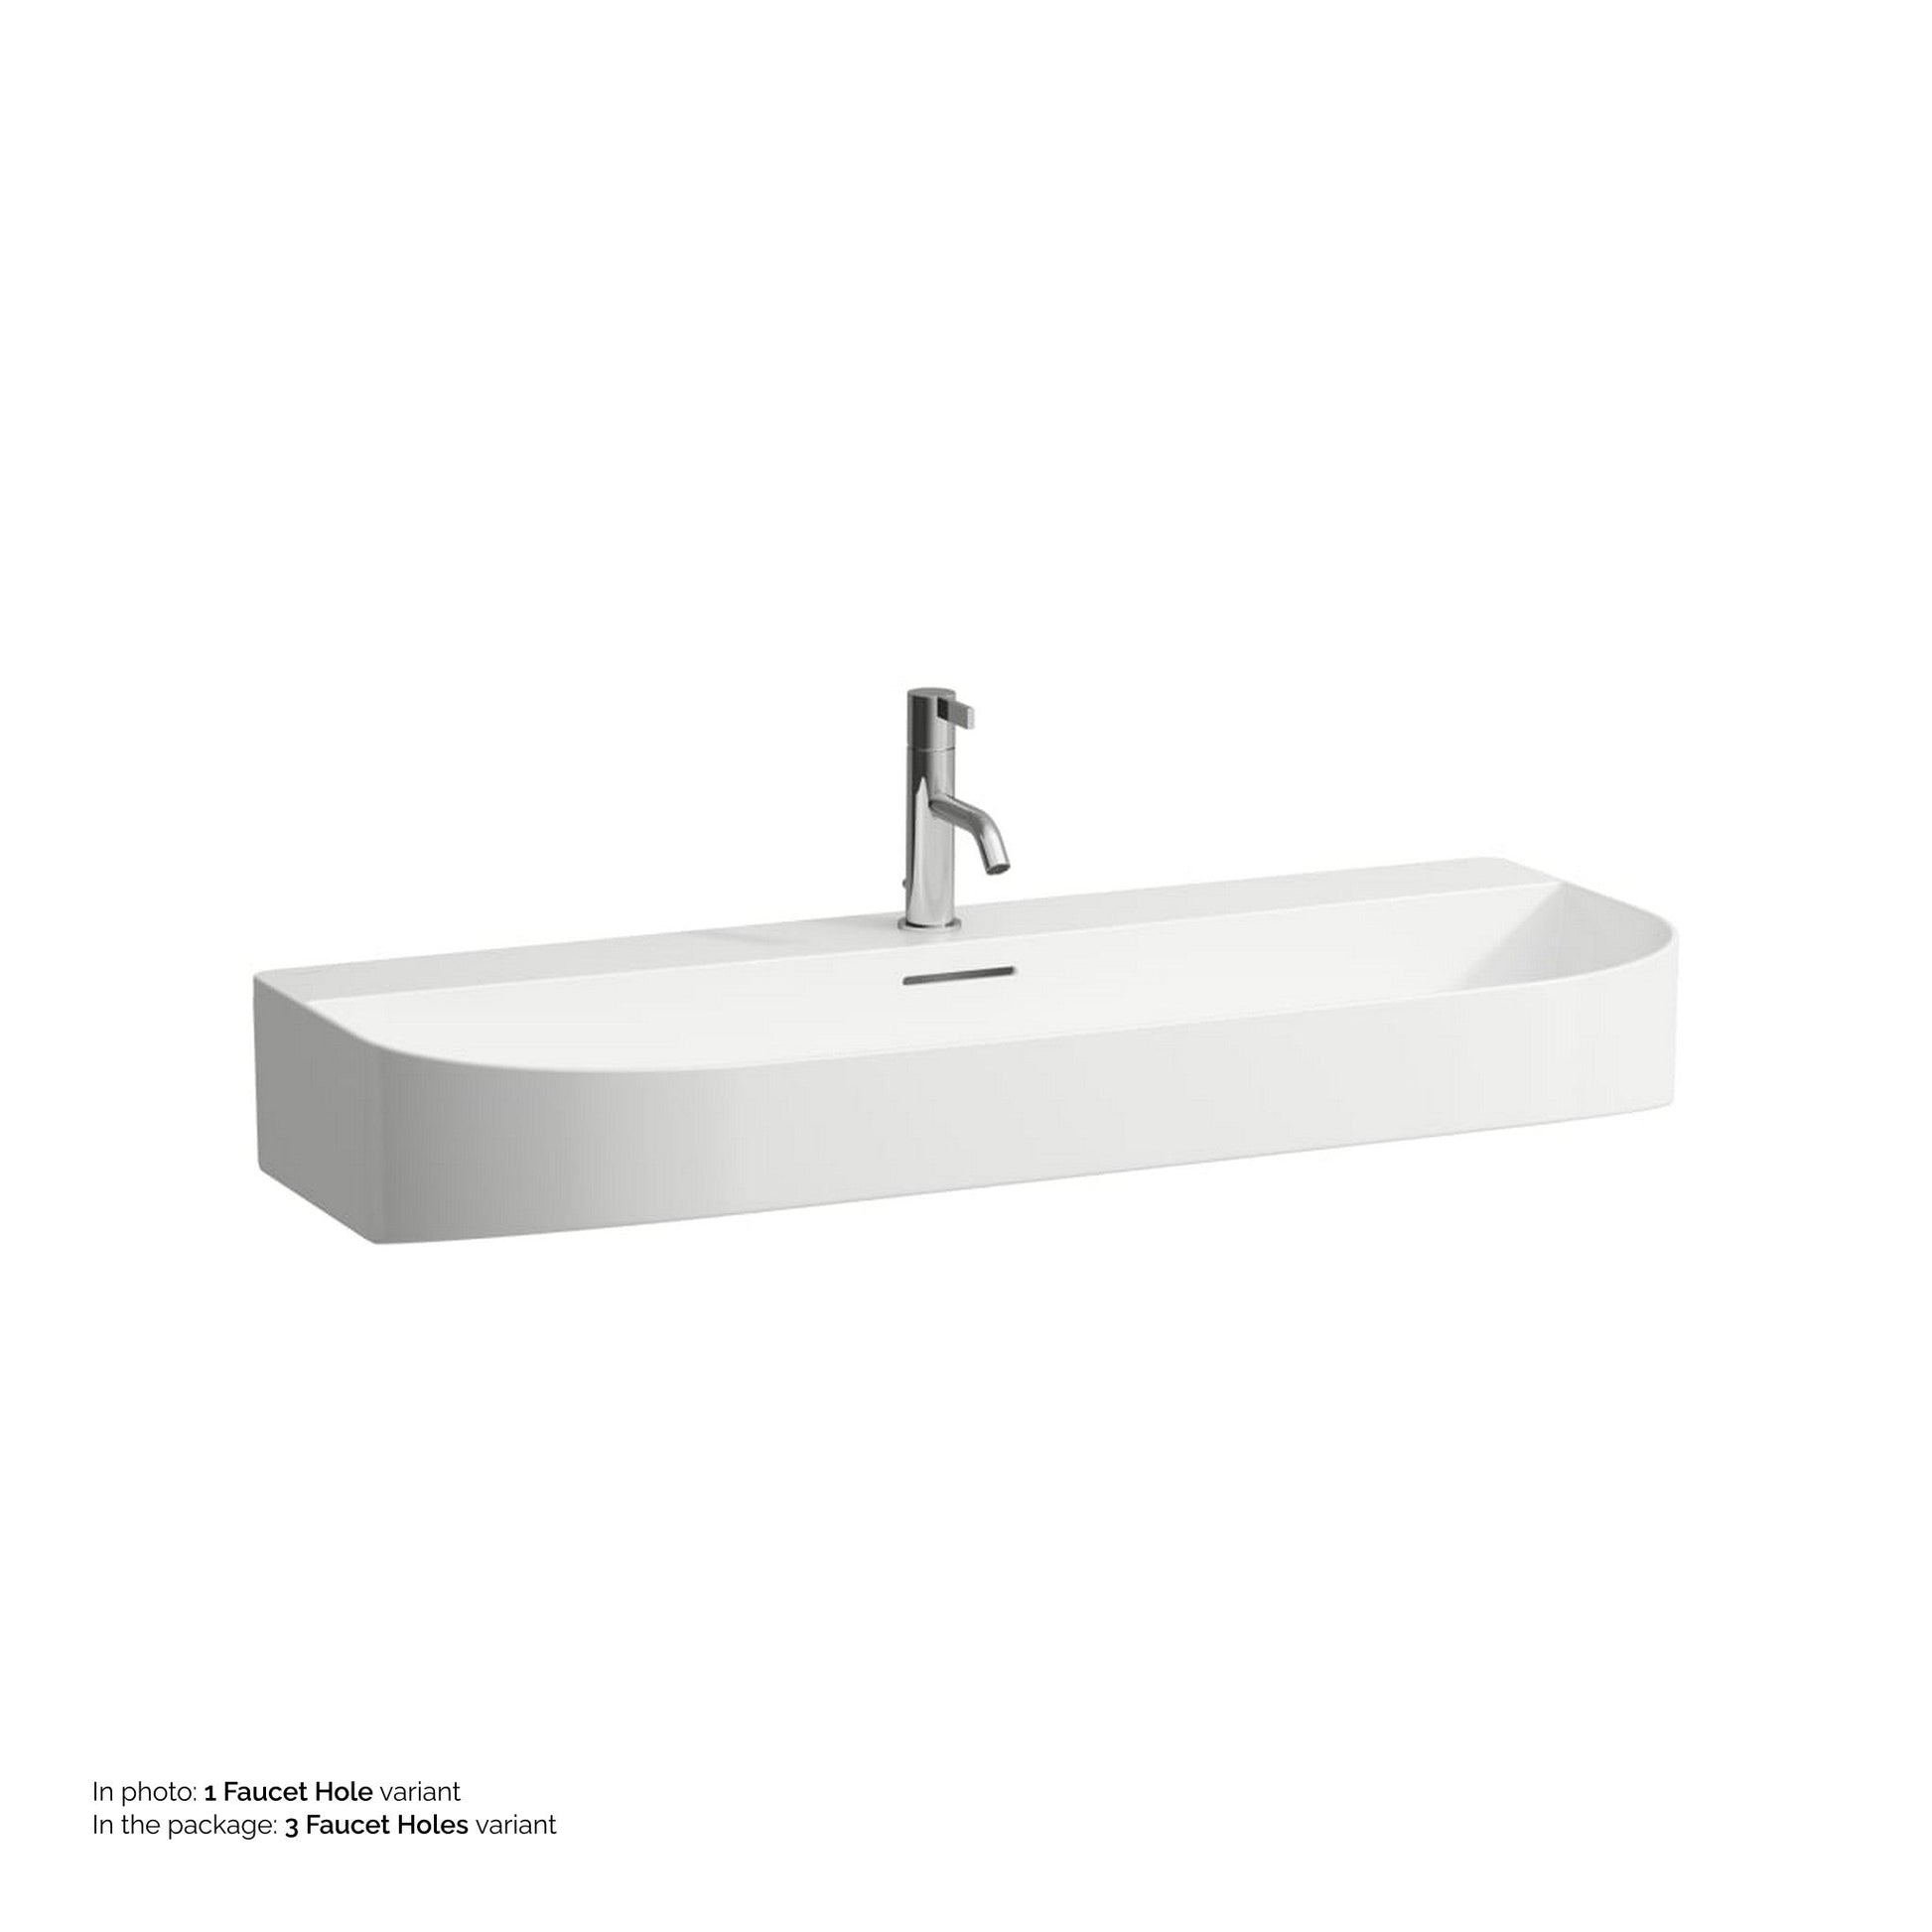 Laufen Sonar 39" White Ceramic Wall-Mounted Bathroom Sink With 8" Spread 3 Faucet Holes